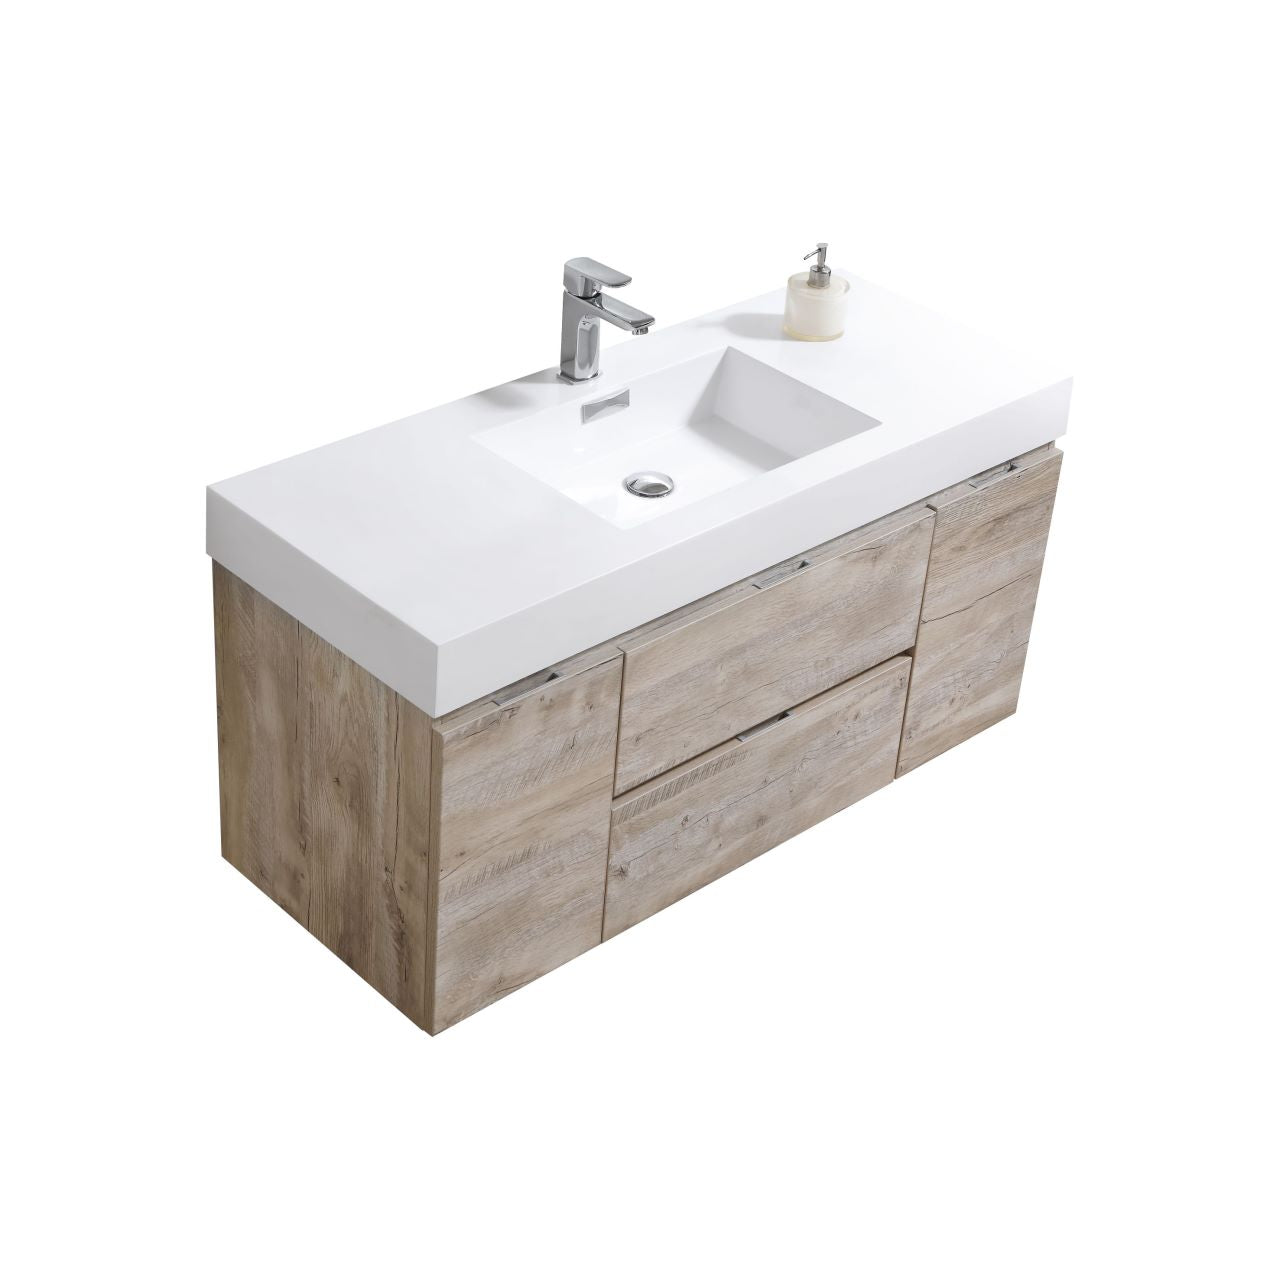 KUBEBATH Bliss BSL48-NW 48" Single Wall Mount Bathroom Vanity in Nature Wood with White Acrylic Composite, Integrated Sink, Angled View